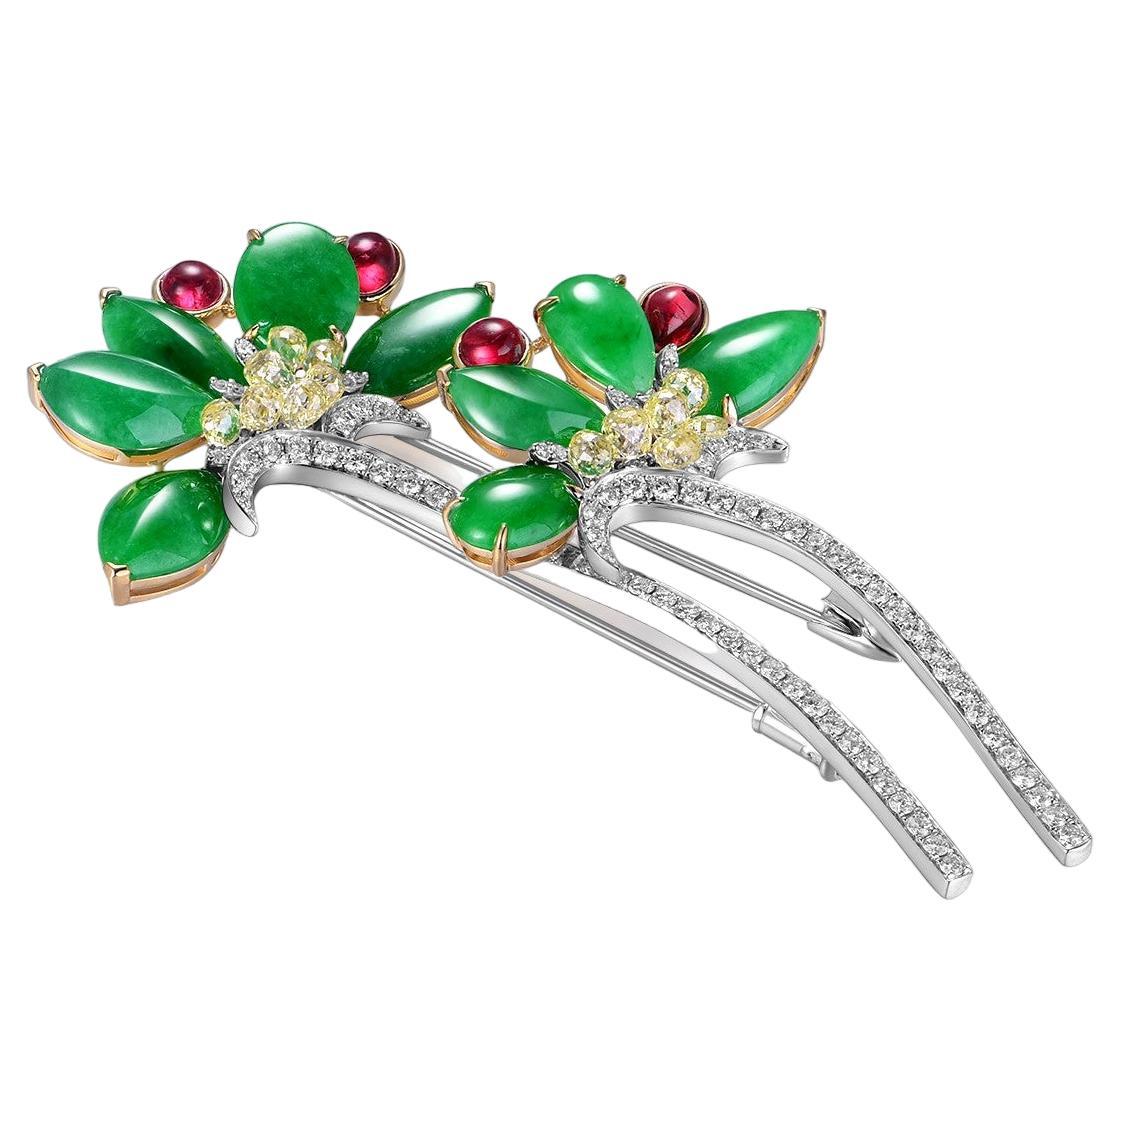 Discover the epitome of luxury with this magnificent brooch, a symphony of precious materials and expert craftsmanship. Forged in the finest 18-karat gold, its design features sumptuous green jade petals unfurling gracefully. Each petal is polished